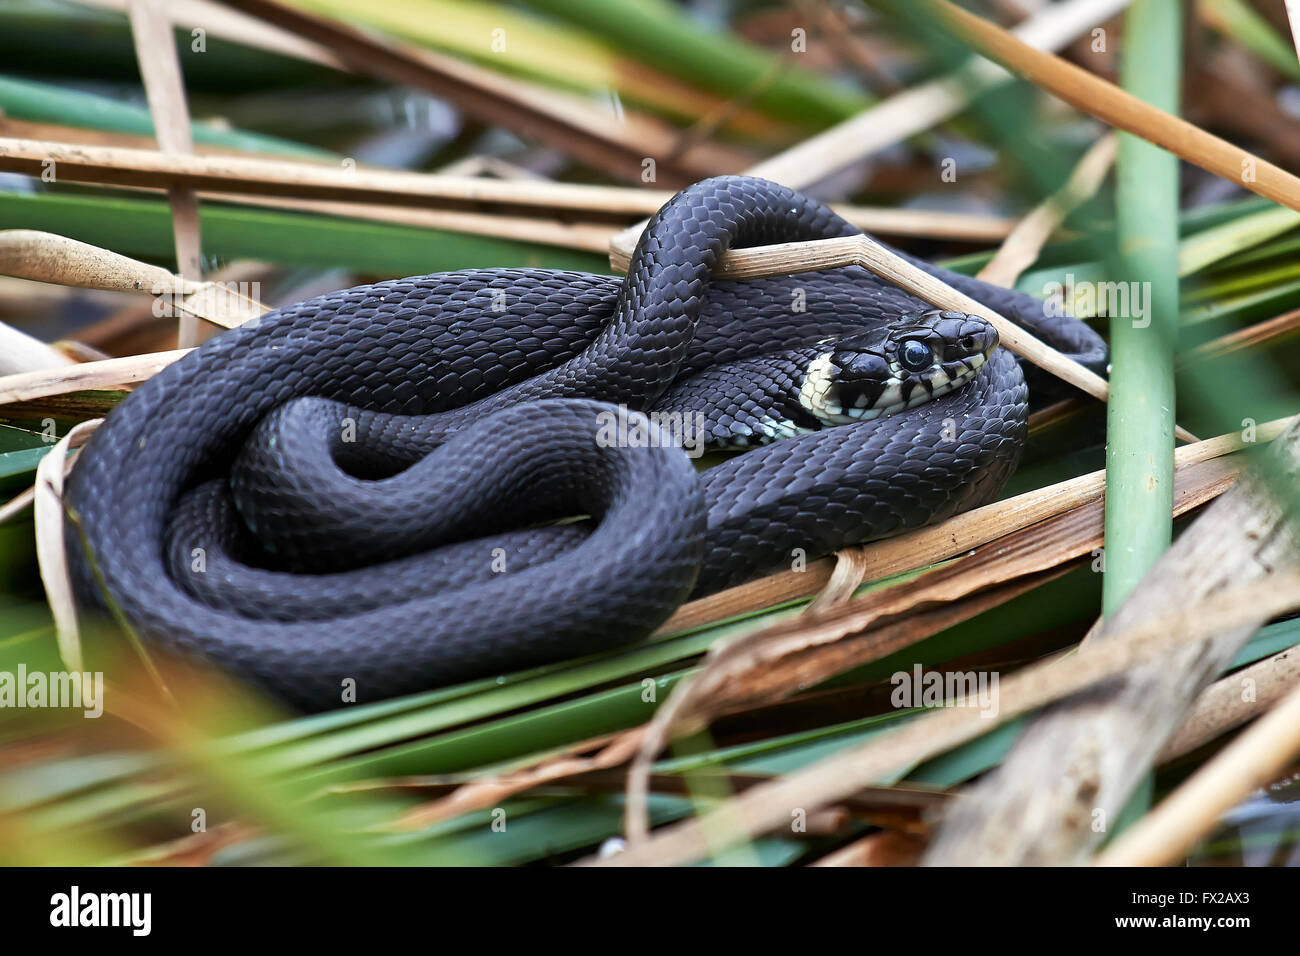 Grass snake hiding and resting in its habitat Stock Photo